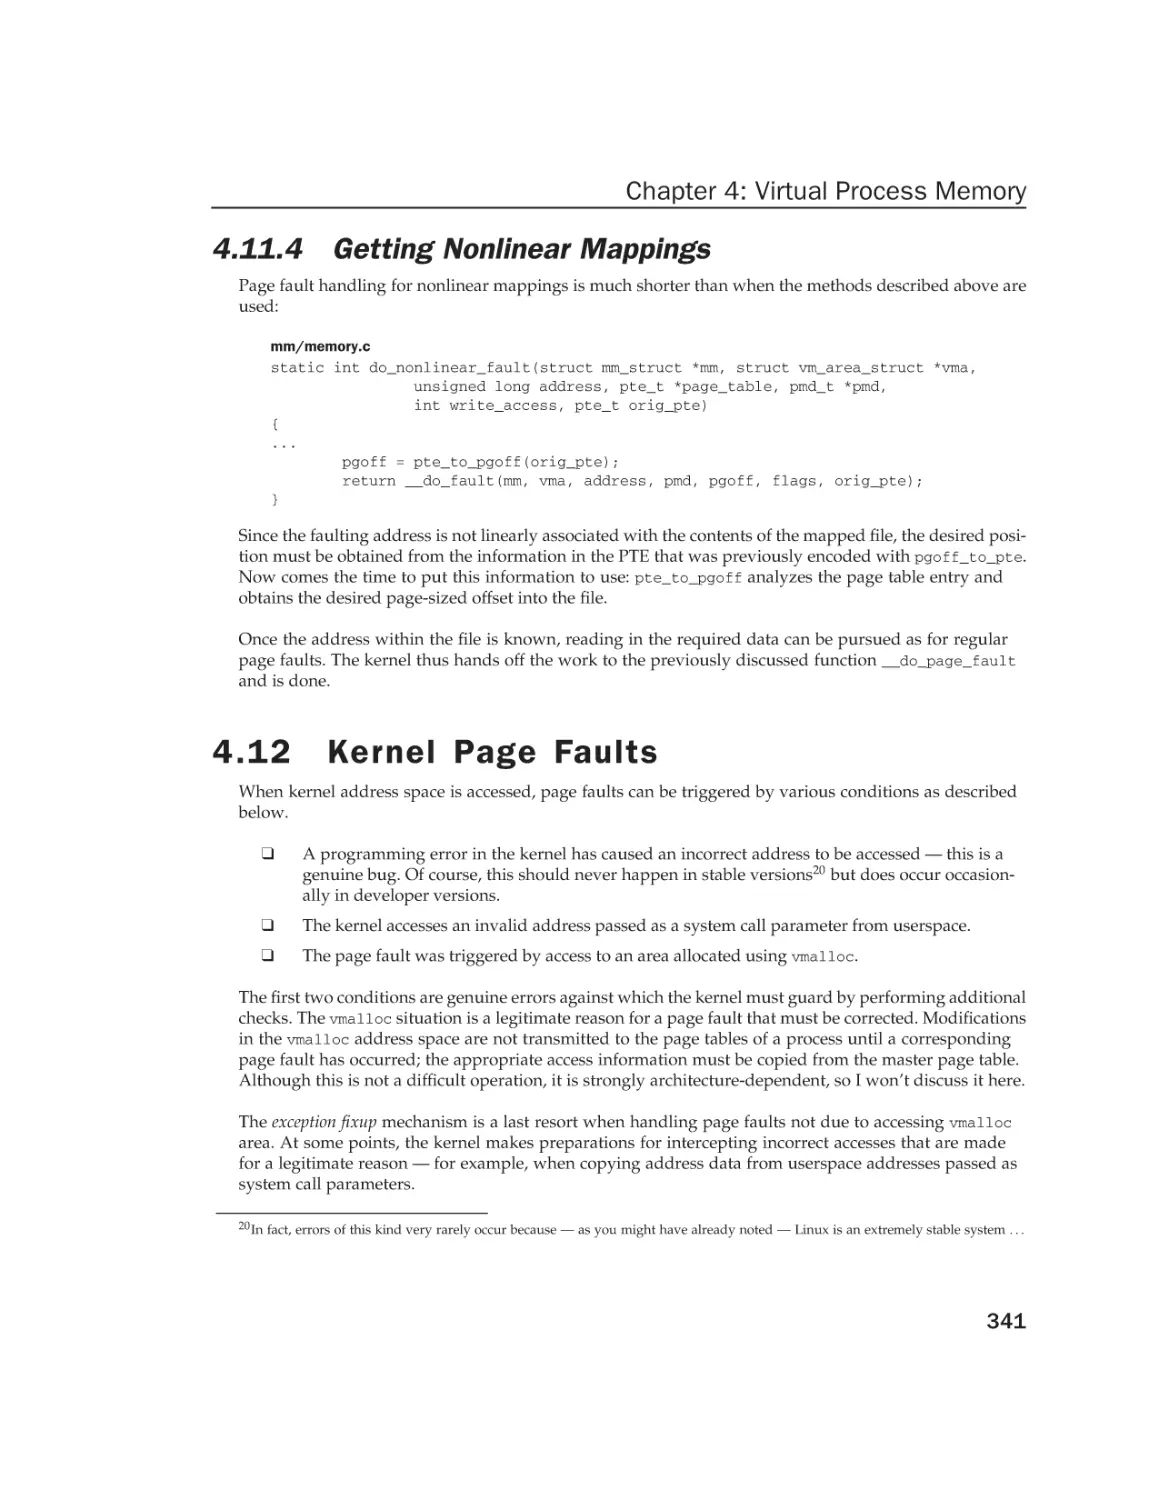 4.12 Kernel Page Faults